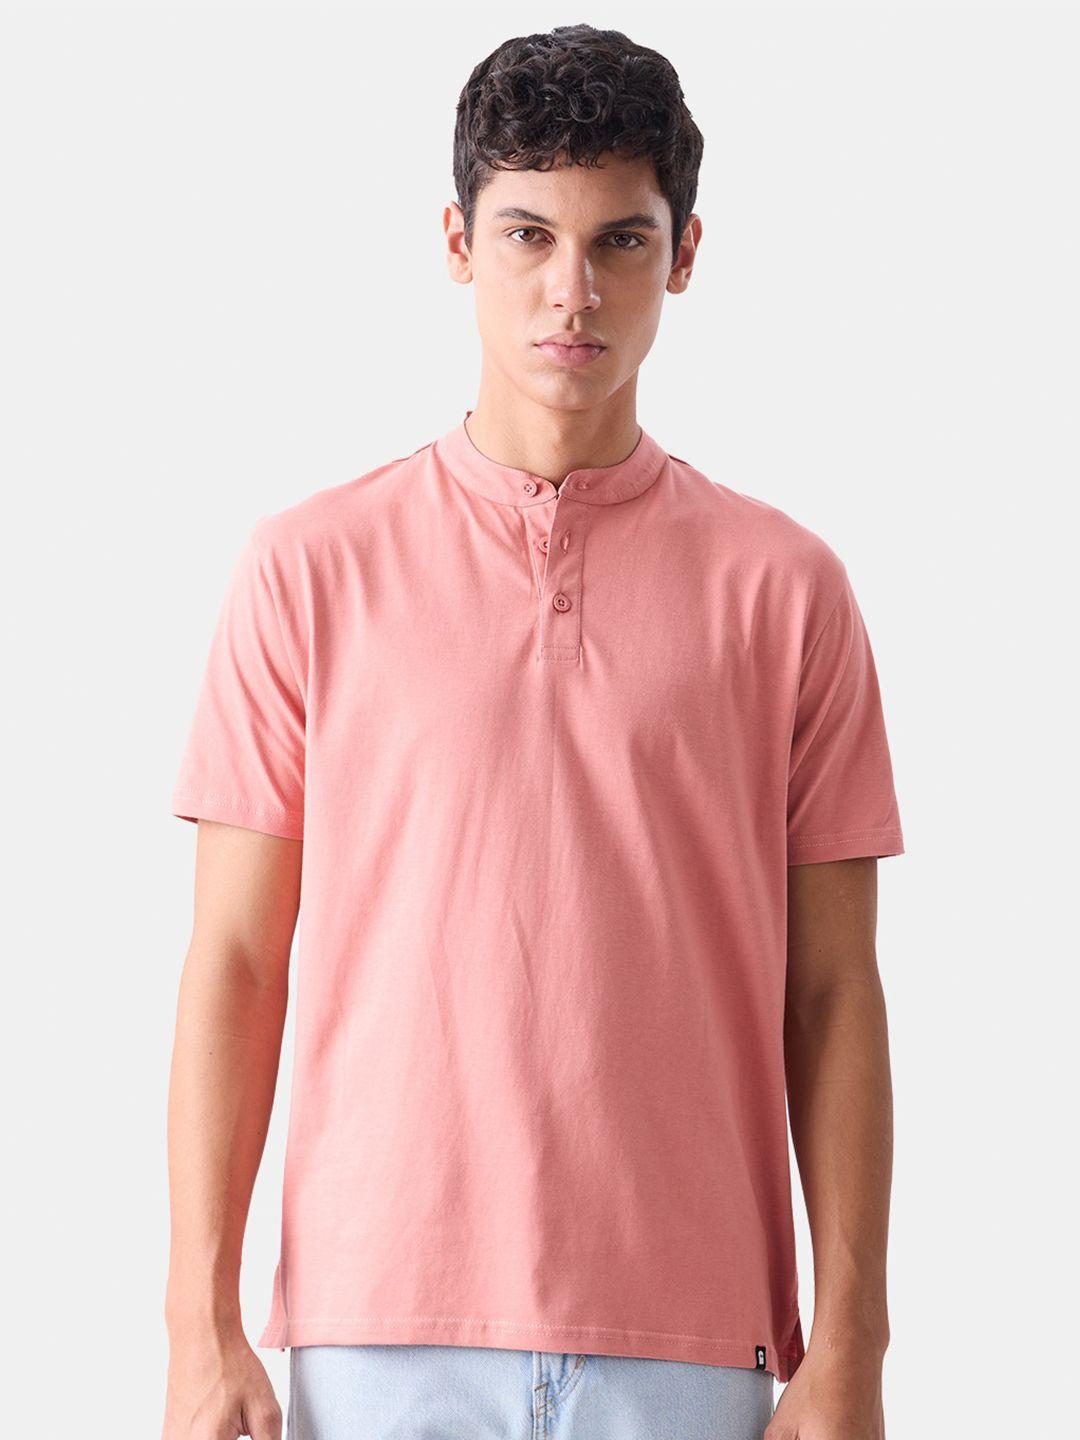 the souled store pink henley pure cotton t-shirt